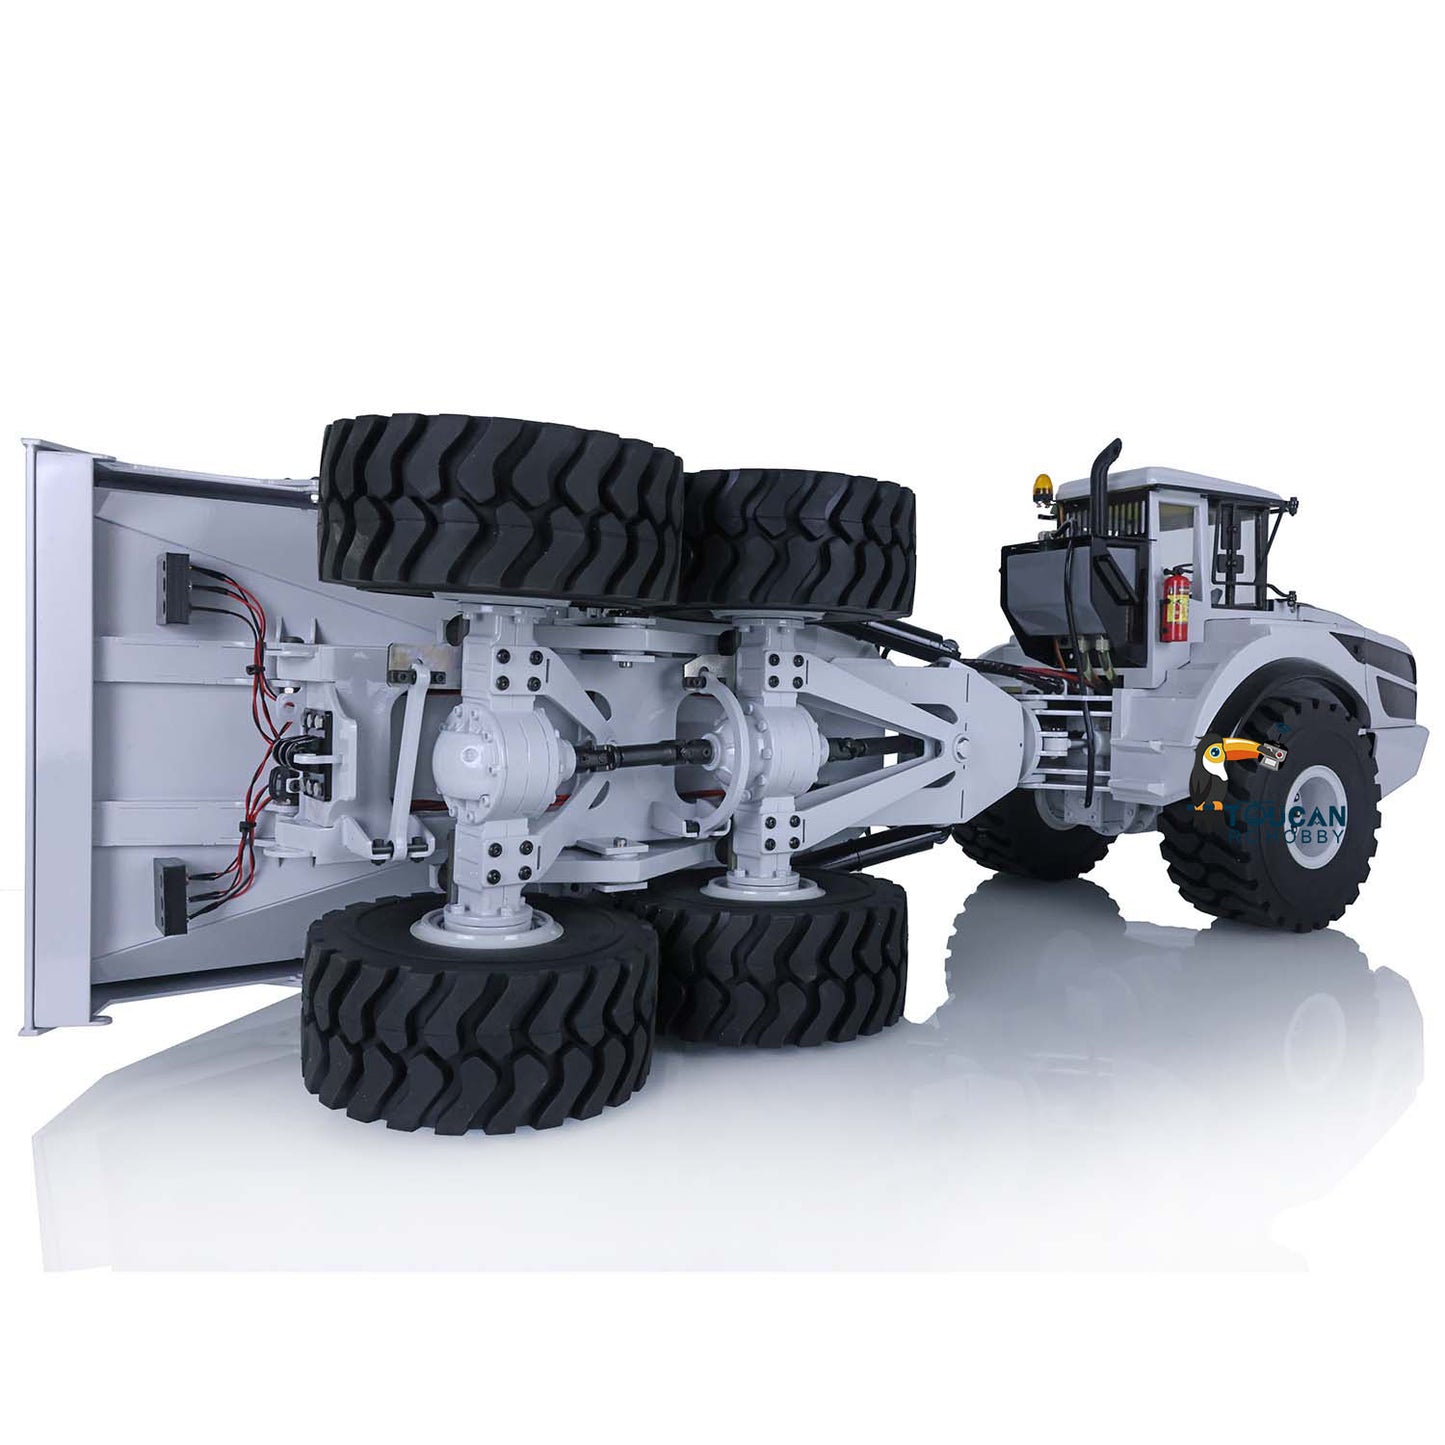 US STOCK 1/14 Scale Metal Hydraulic 6*6 Remote Controlled Articulated Truck Dumper Engineering Vehicle Model Motor ESC Lights